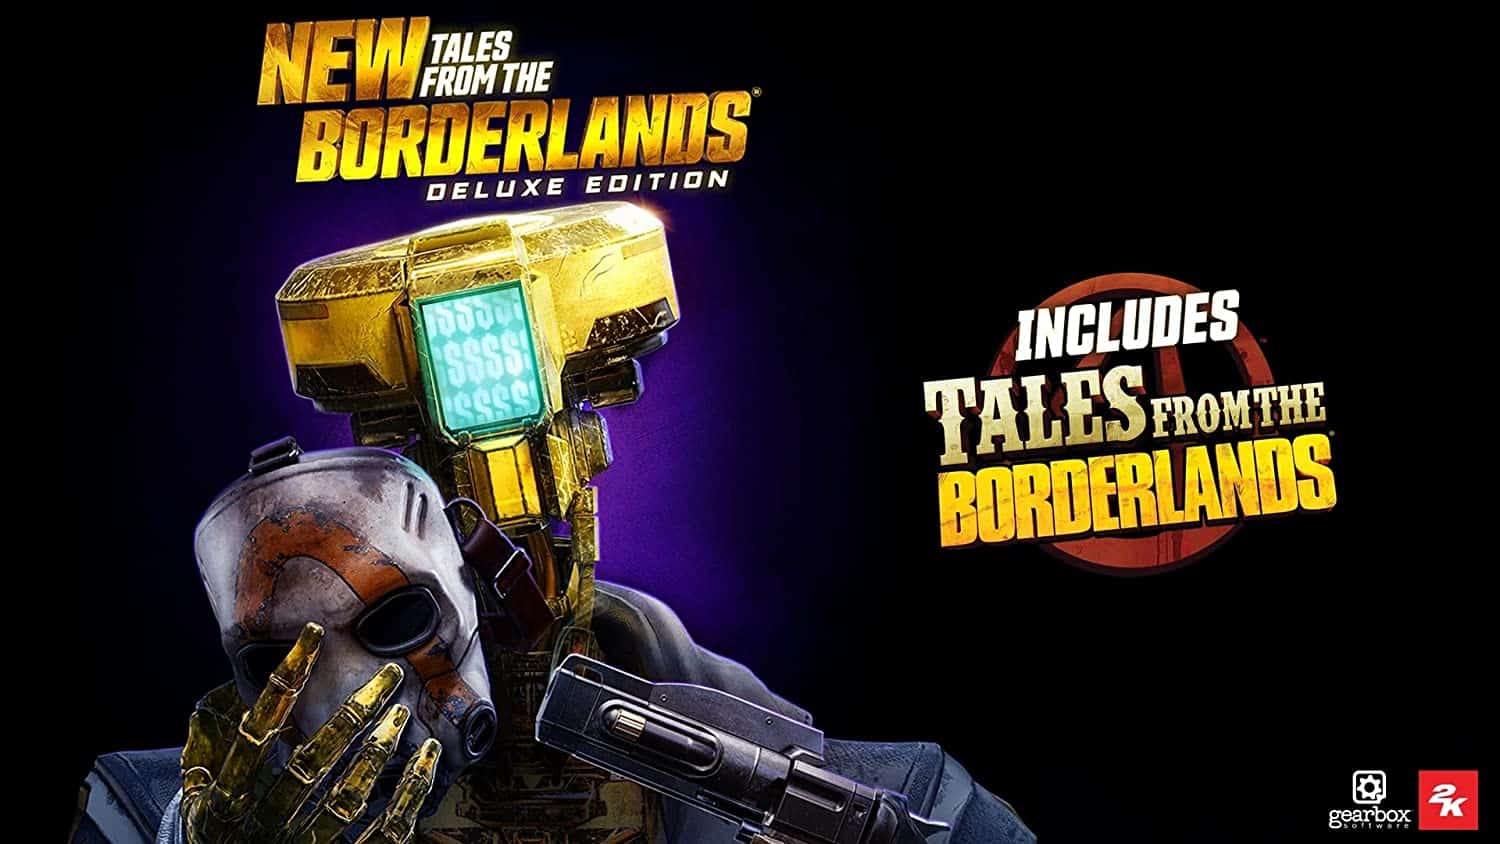 New Tales from the Borderlands Deluxe Edition Cover View